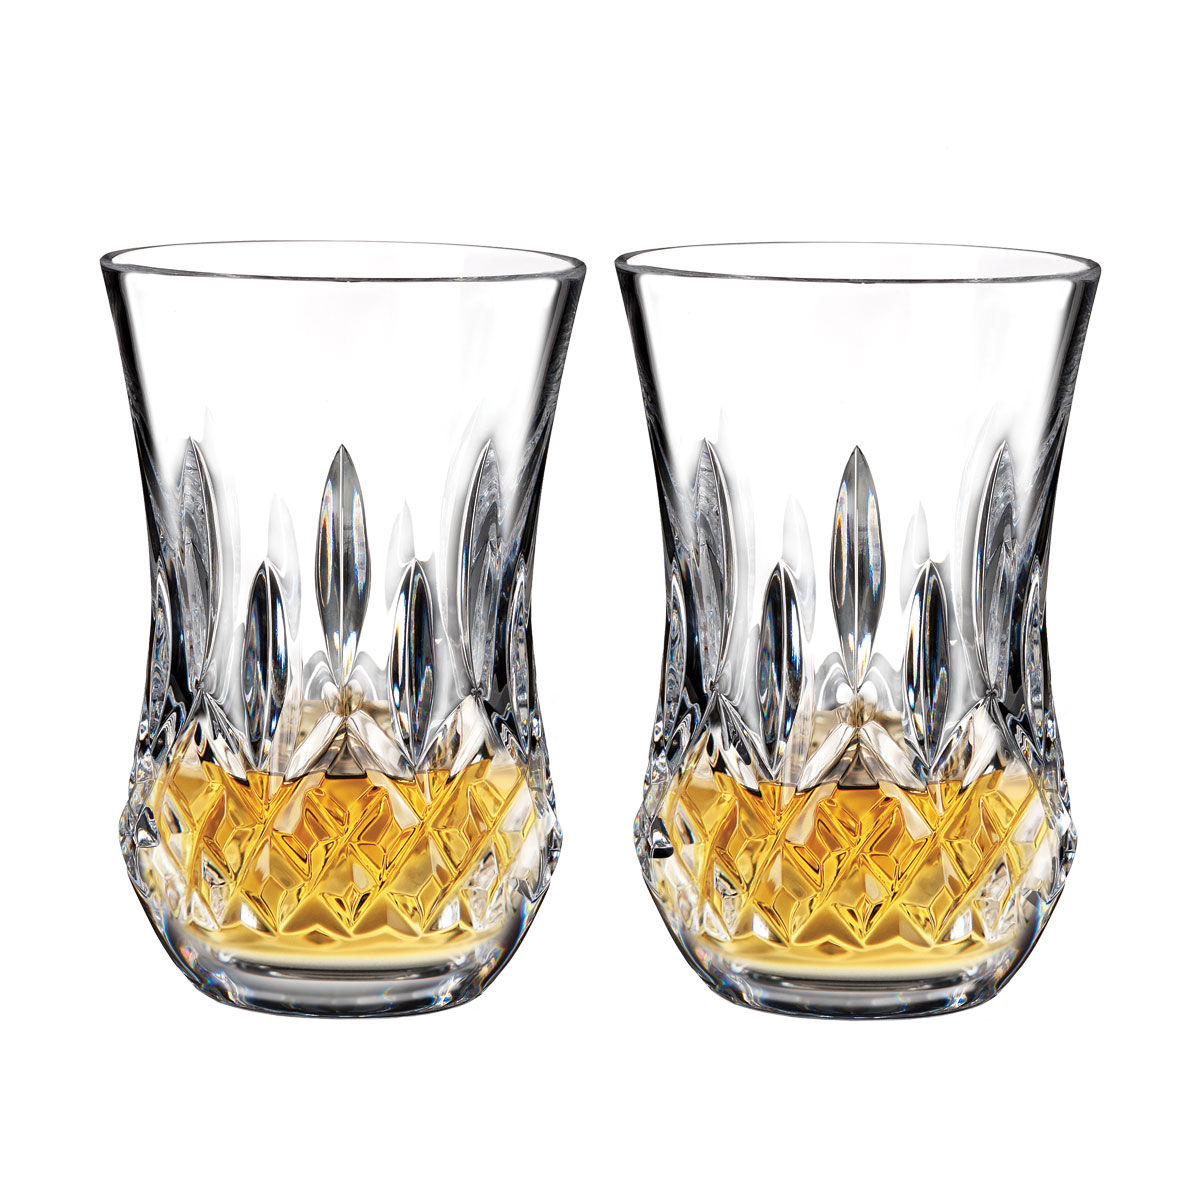 Waterford Crystal, Lismore Flared Sipping Whiskey Tumbler, Pair